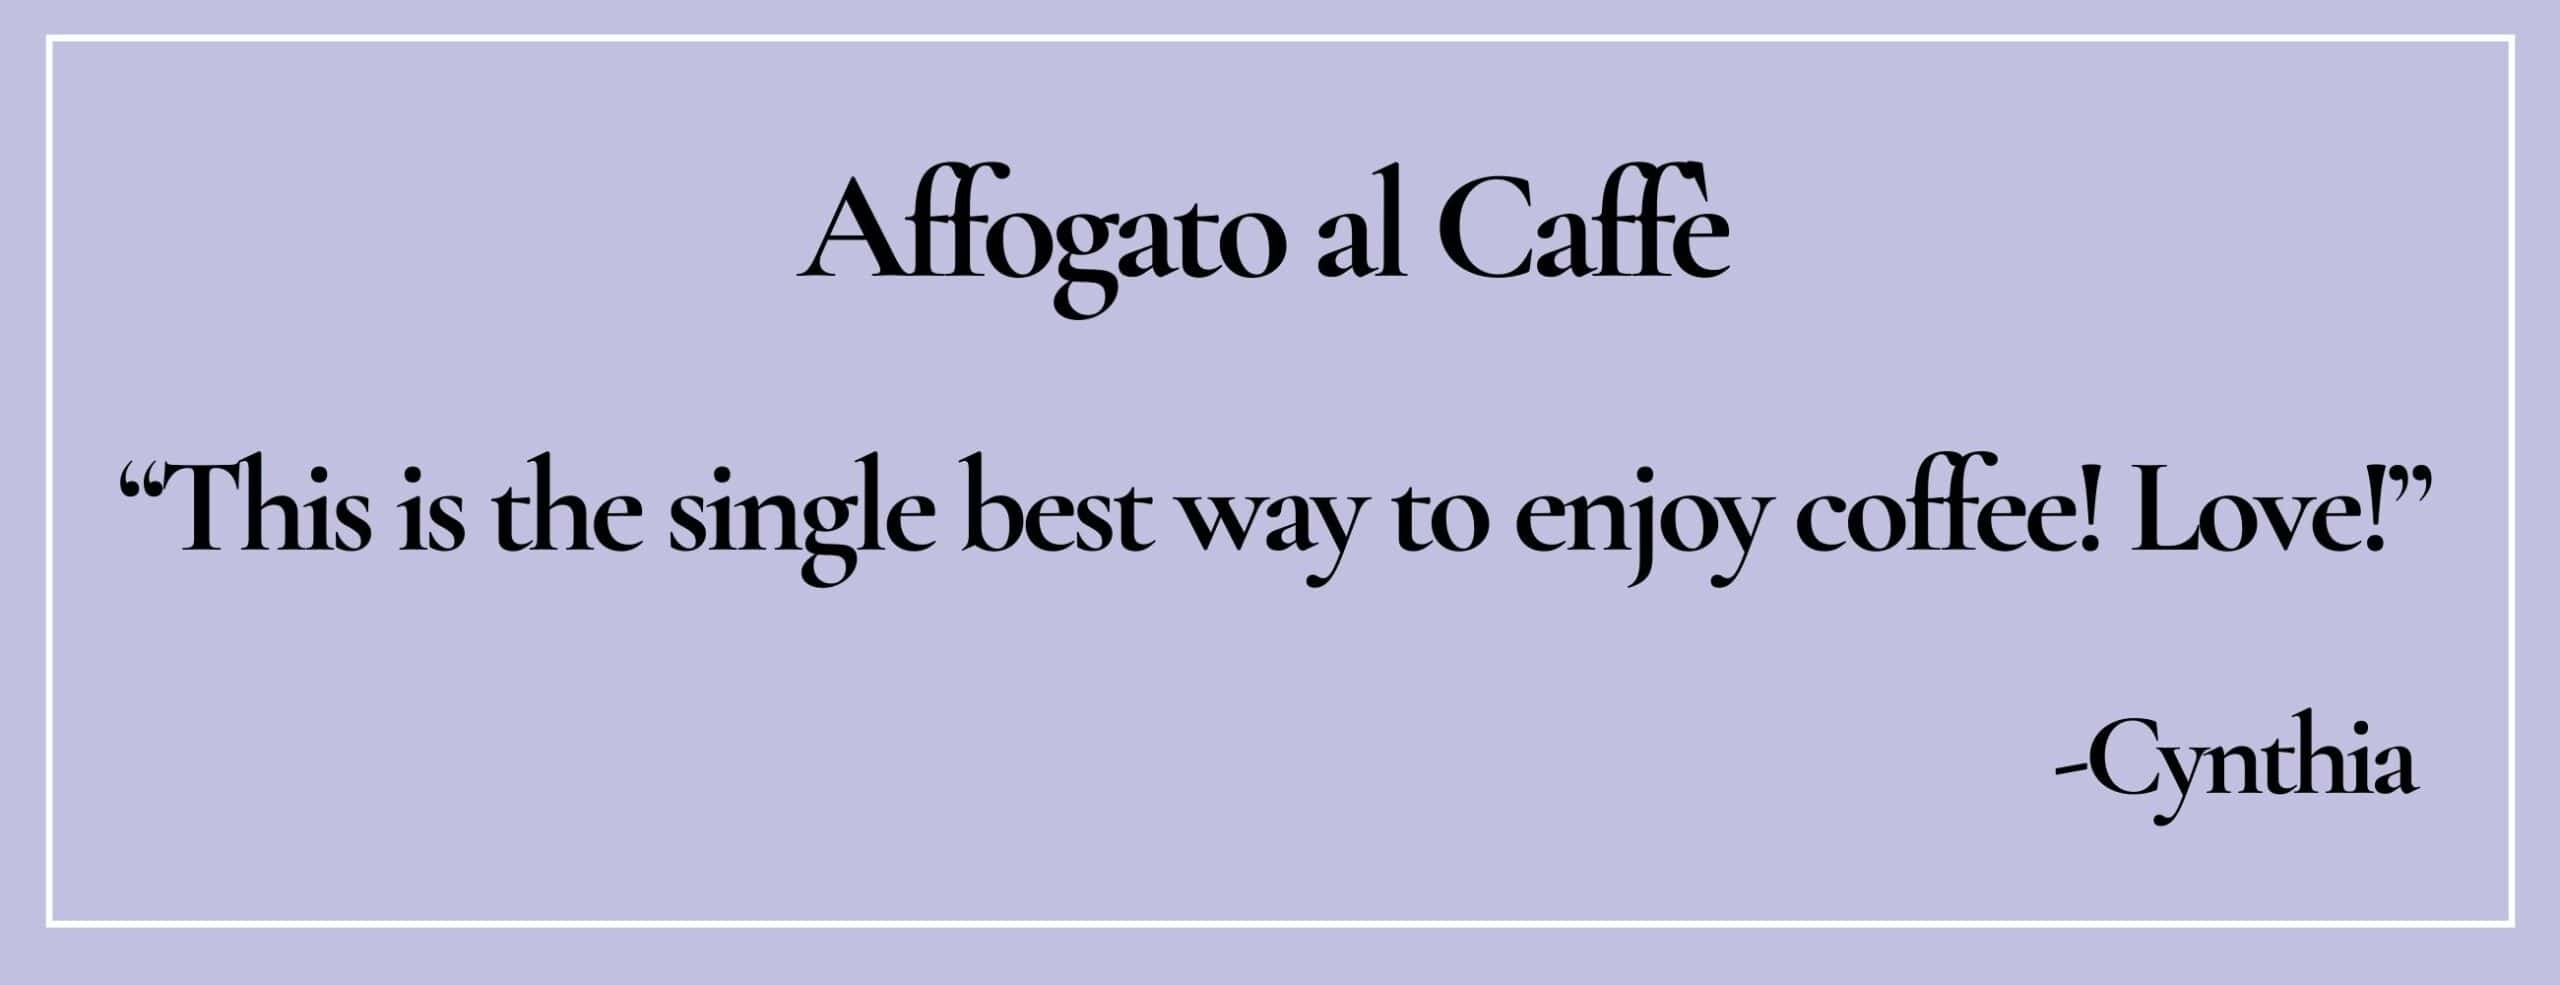 text box with quote: "This is the single best way to enjoy coffee! Love!" -Cynthia